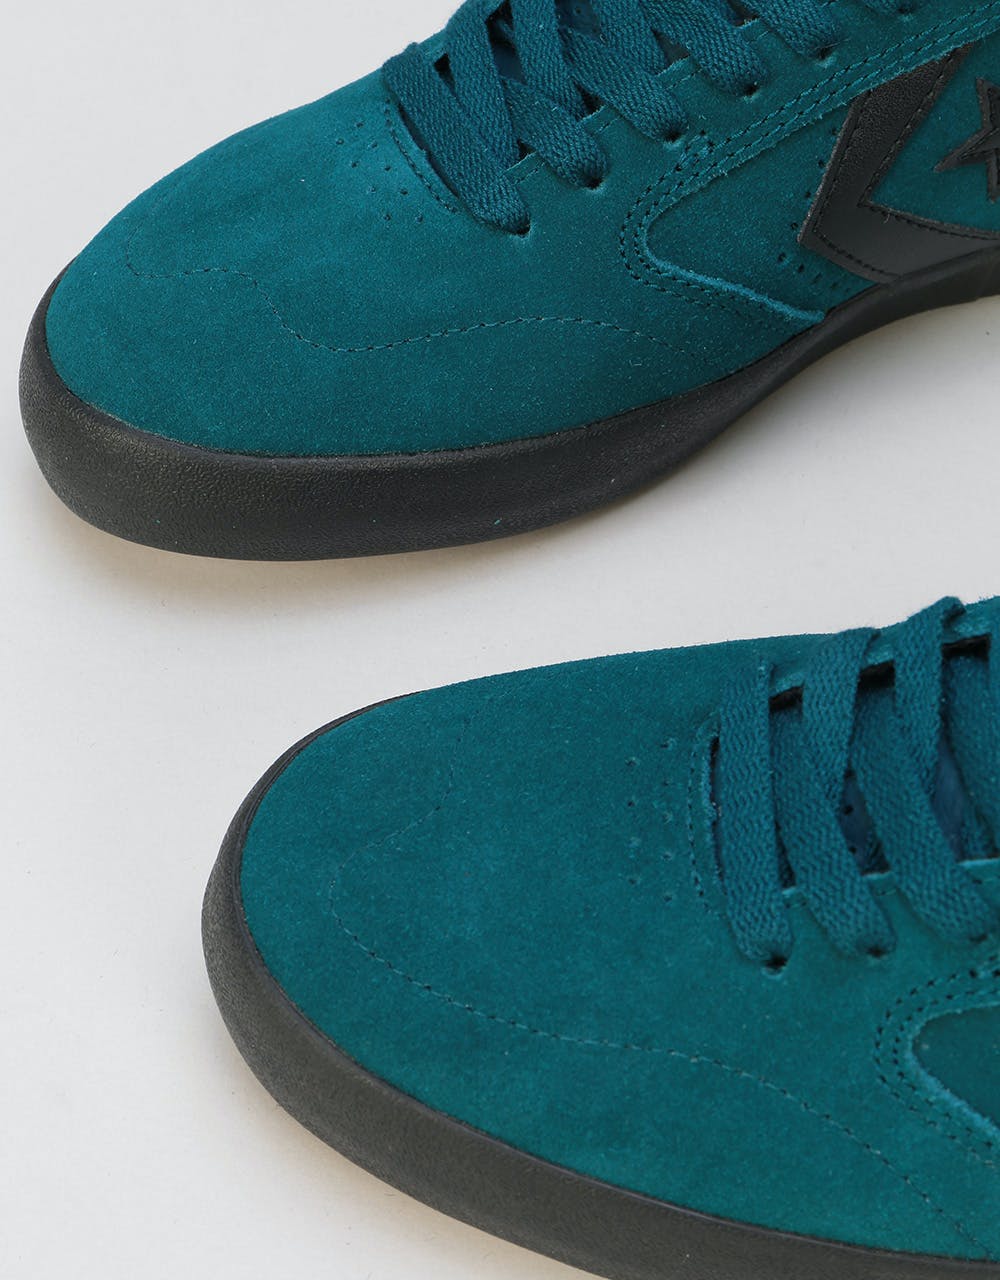 Converse Checkpoint Pro Skate Shoes - Midnight Turquoise/Black/Black